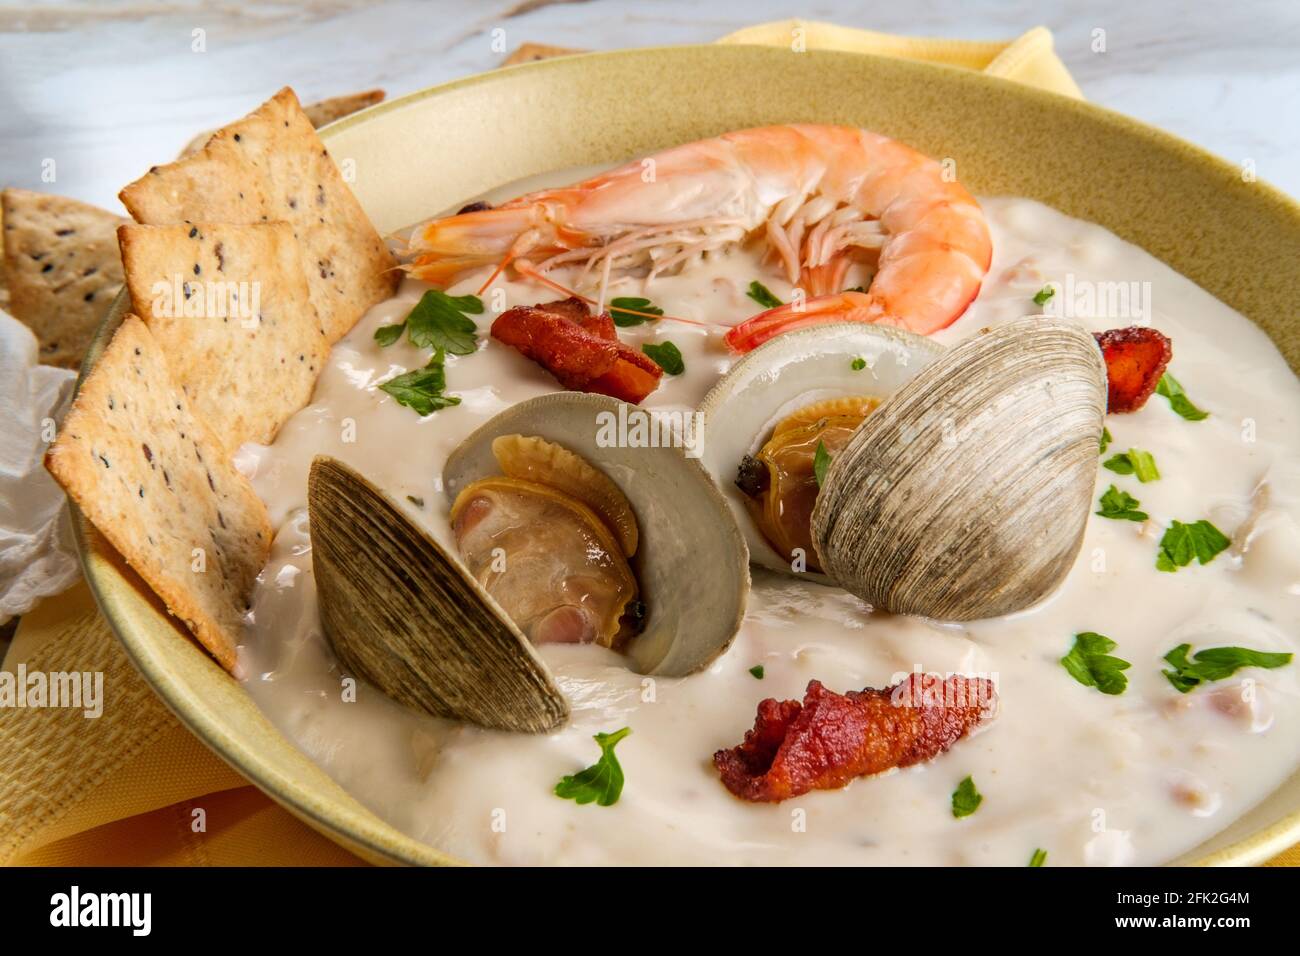 BEST New England Clam Chowder + Video (Canned OR Fresh Clams)